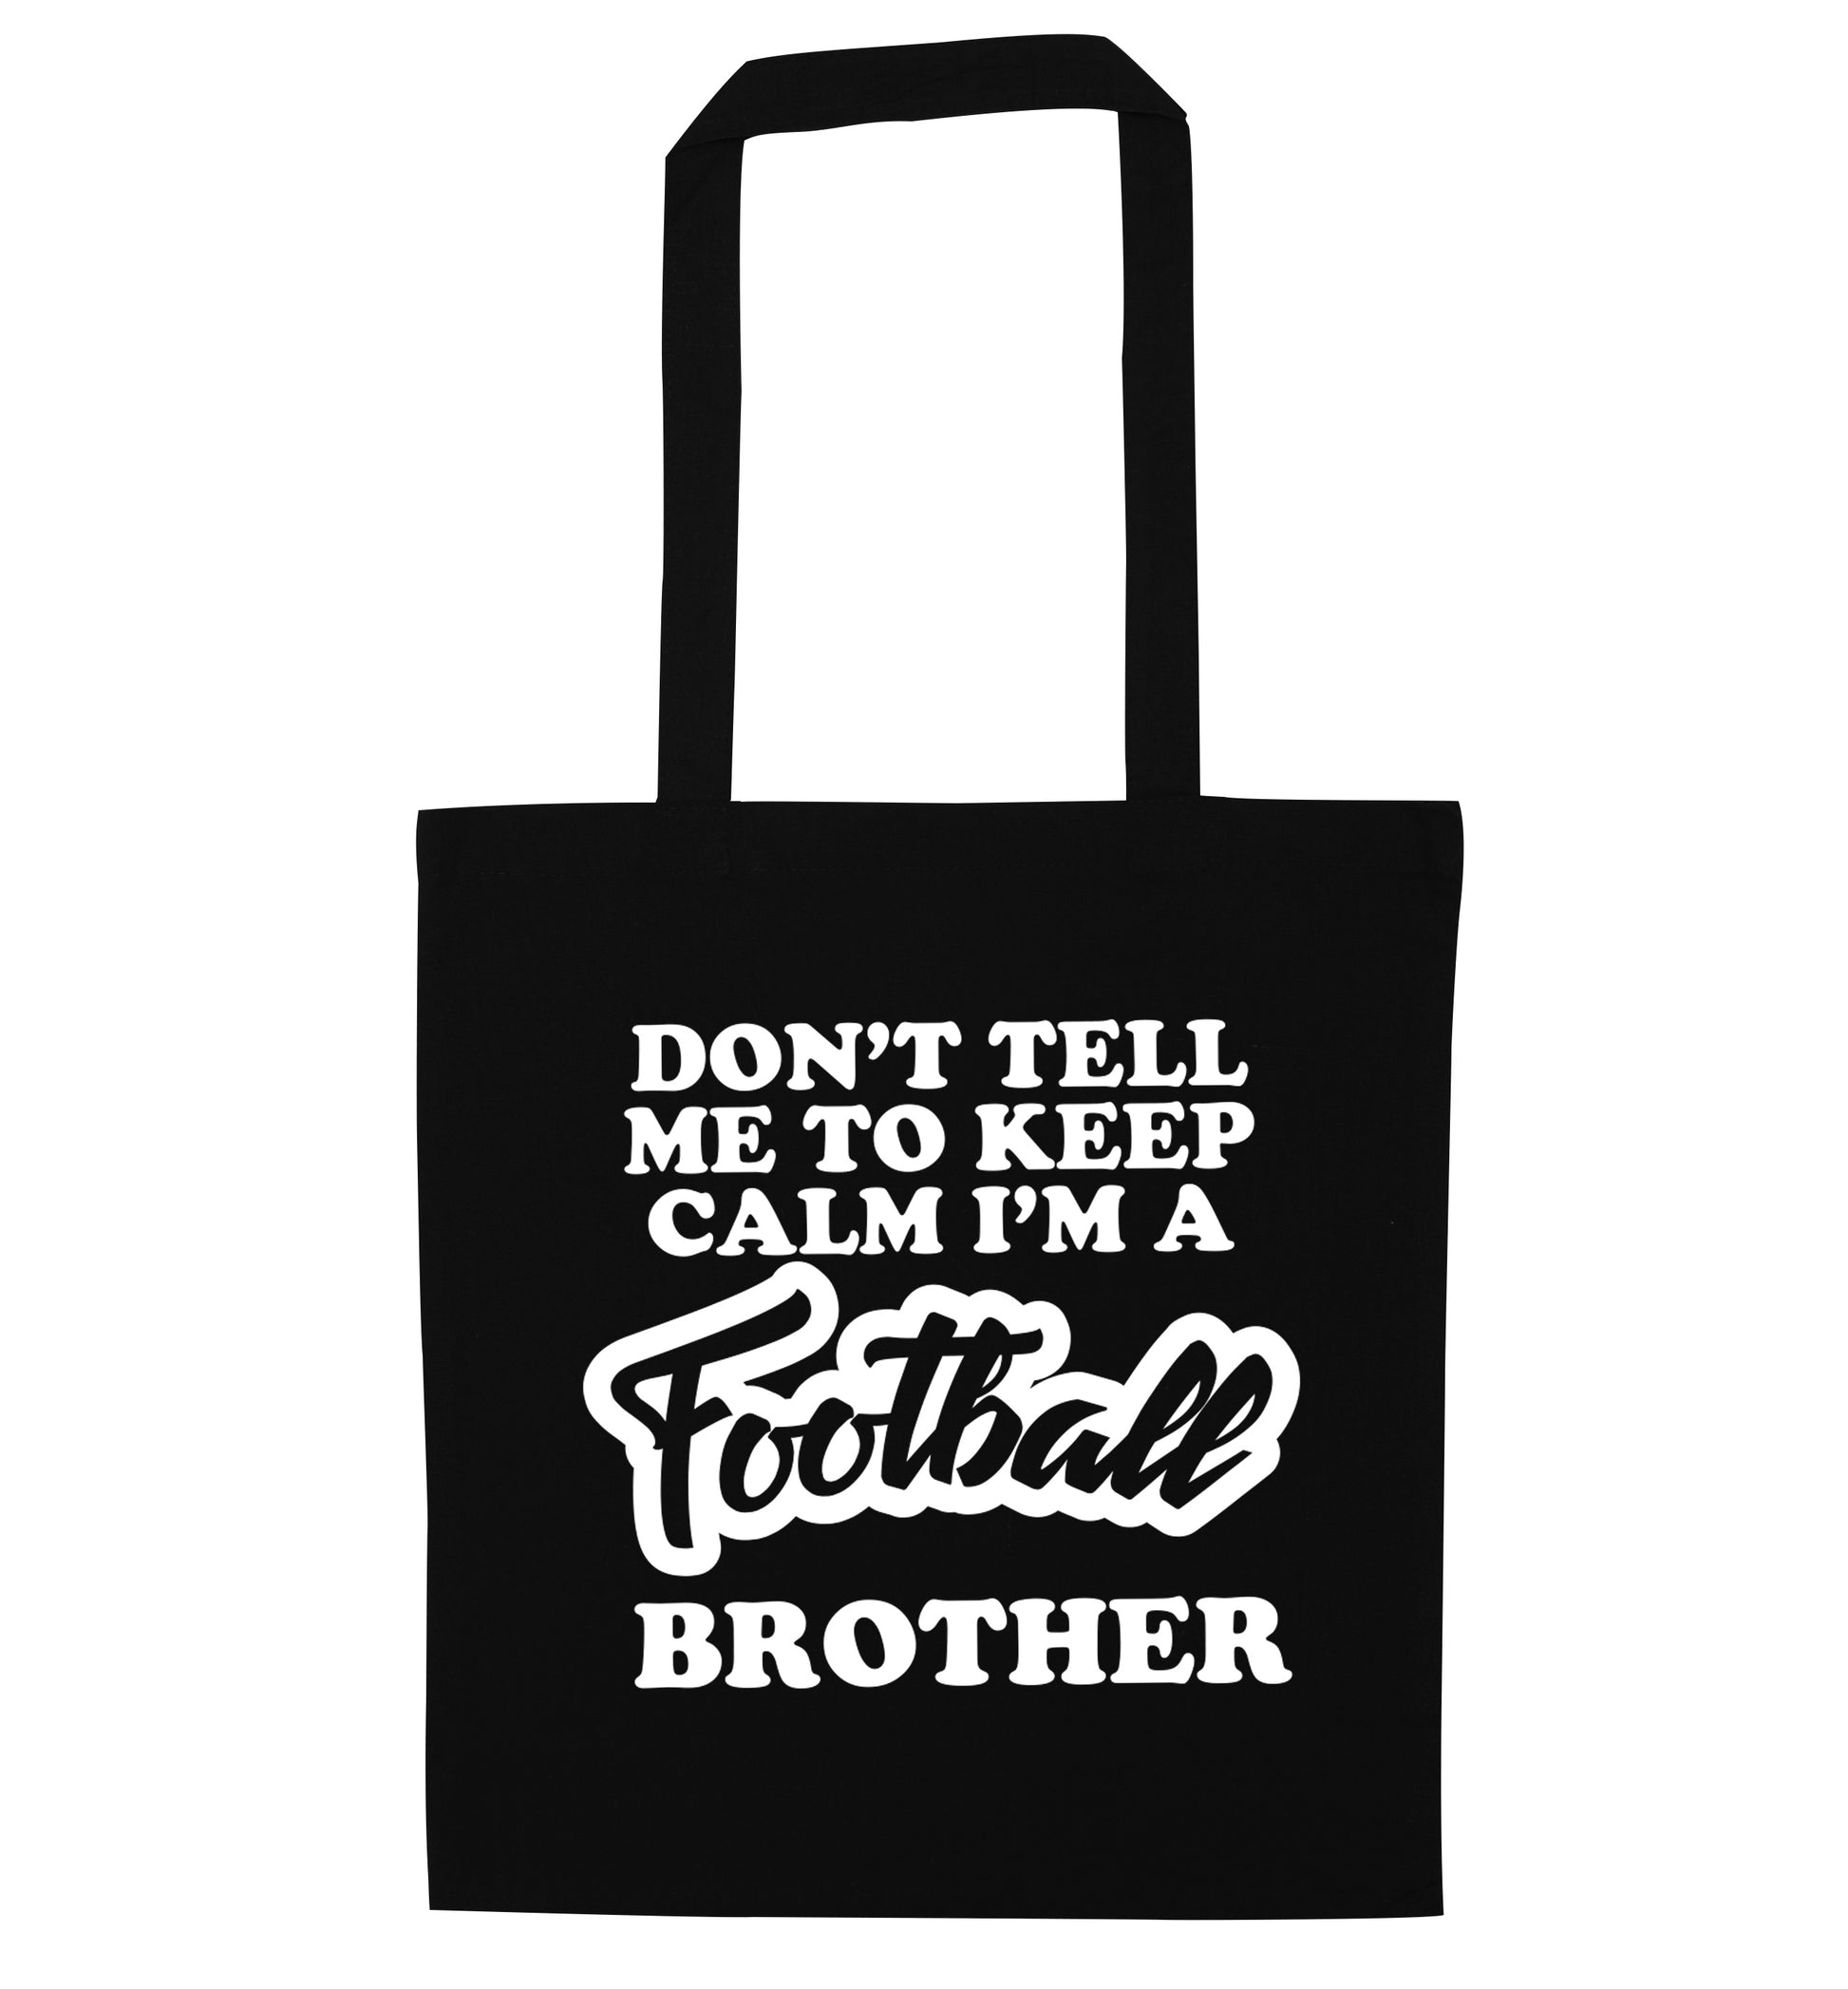 Don't tell me to keep calm I'm a football brother black tote bag